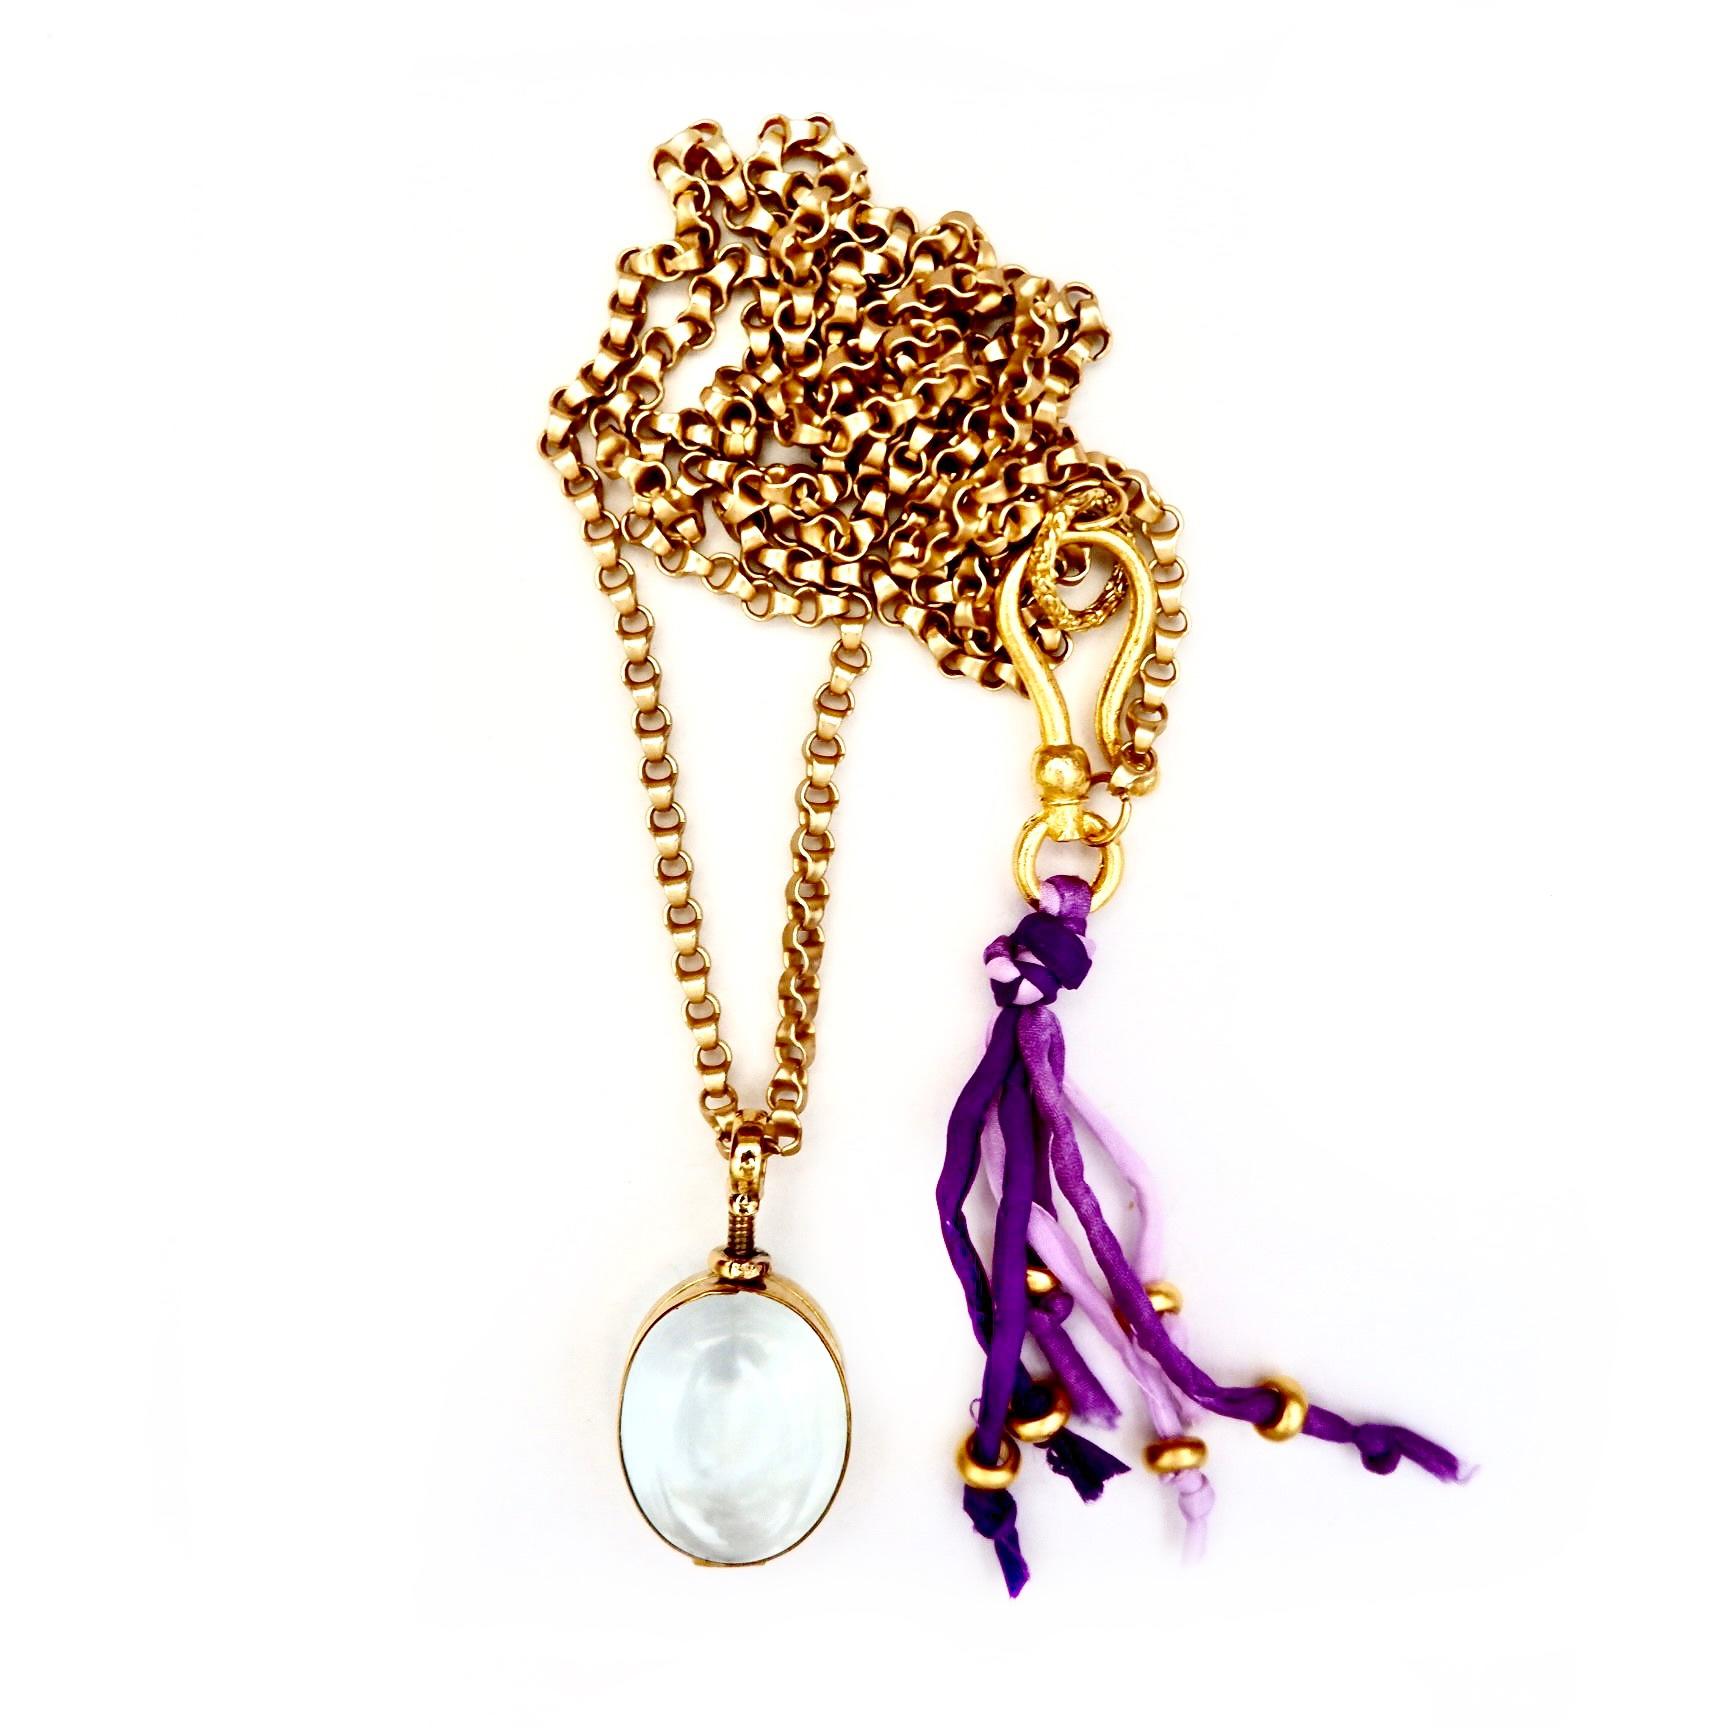 Handcrafted one-of-a-kind necklace, stunning vintage long chain, vintage oval glass locket pendant, finished with giant gold vermeil hook closure, hand-painted silk ribbons in a few shades of lavender finished with gold vermeil rings. Wear it long